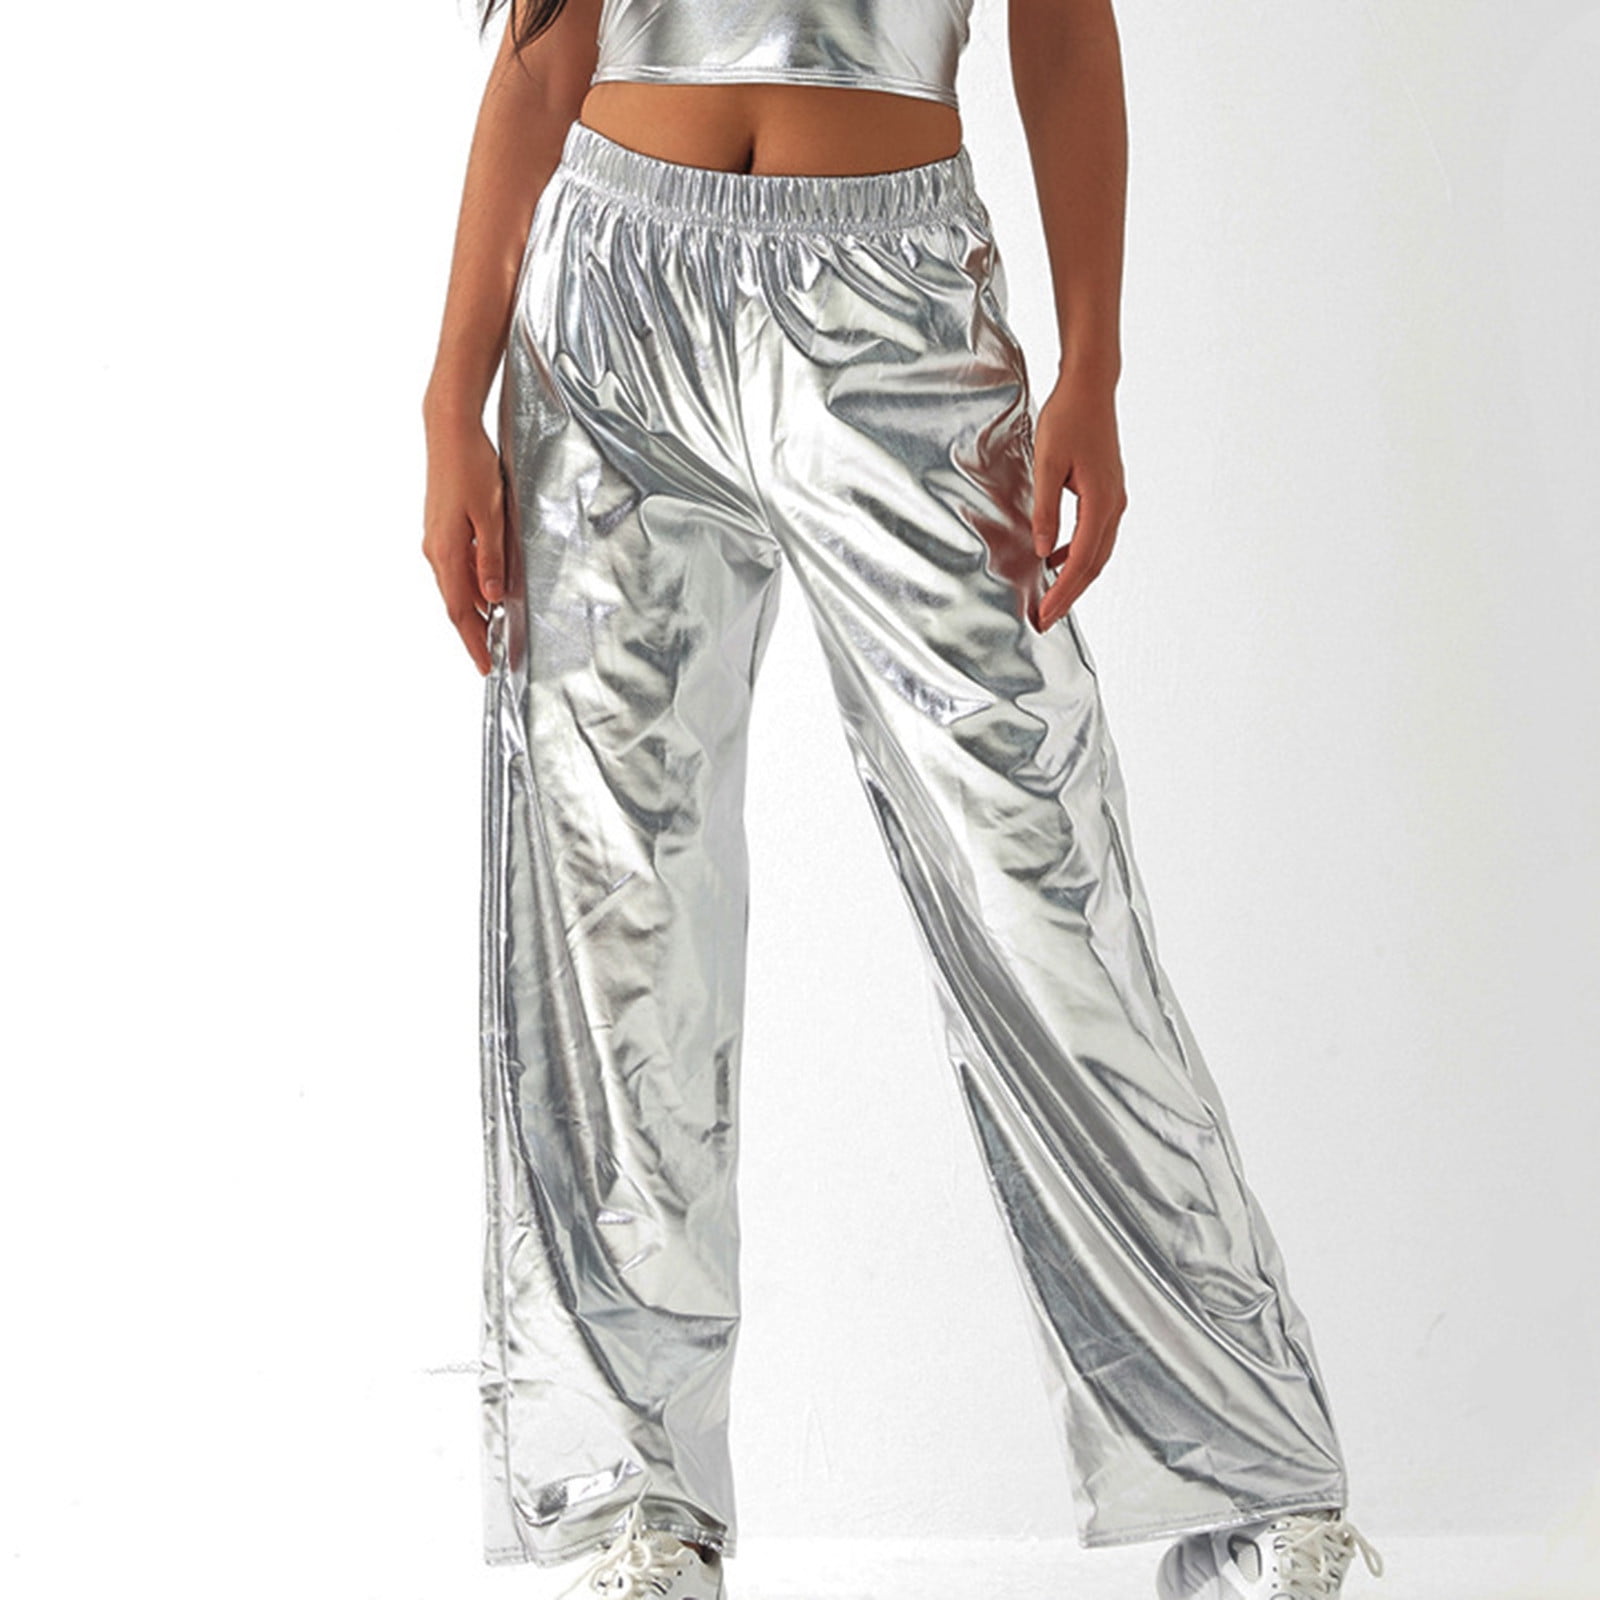 YYDGH Shiny Metallic Pants for Women Elastic High Waist Wide Leg Pants 70s  Disco Dance Party Trousers with Pockets Silver Silver